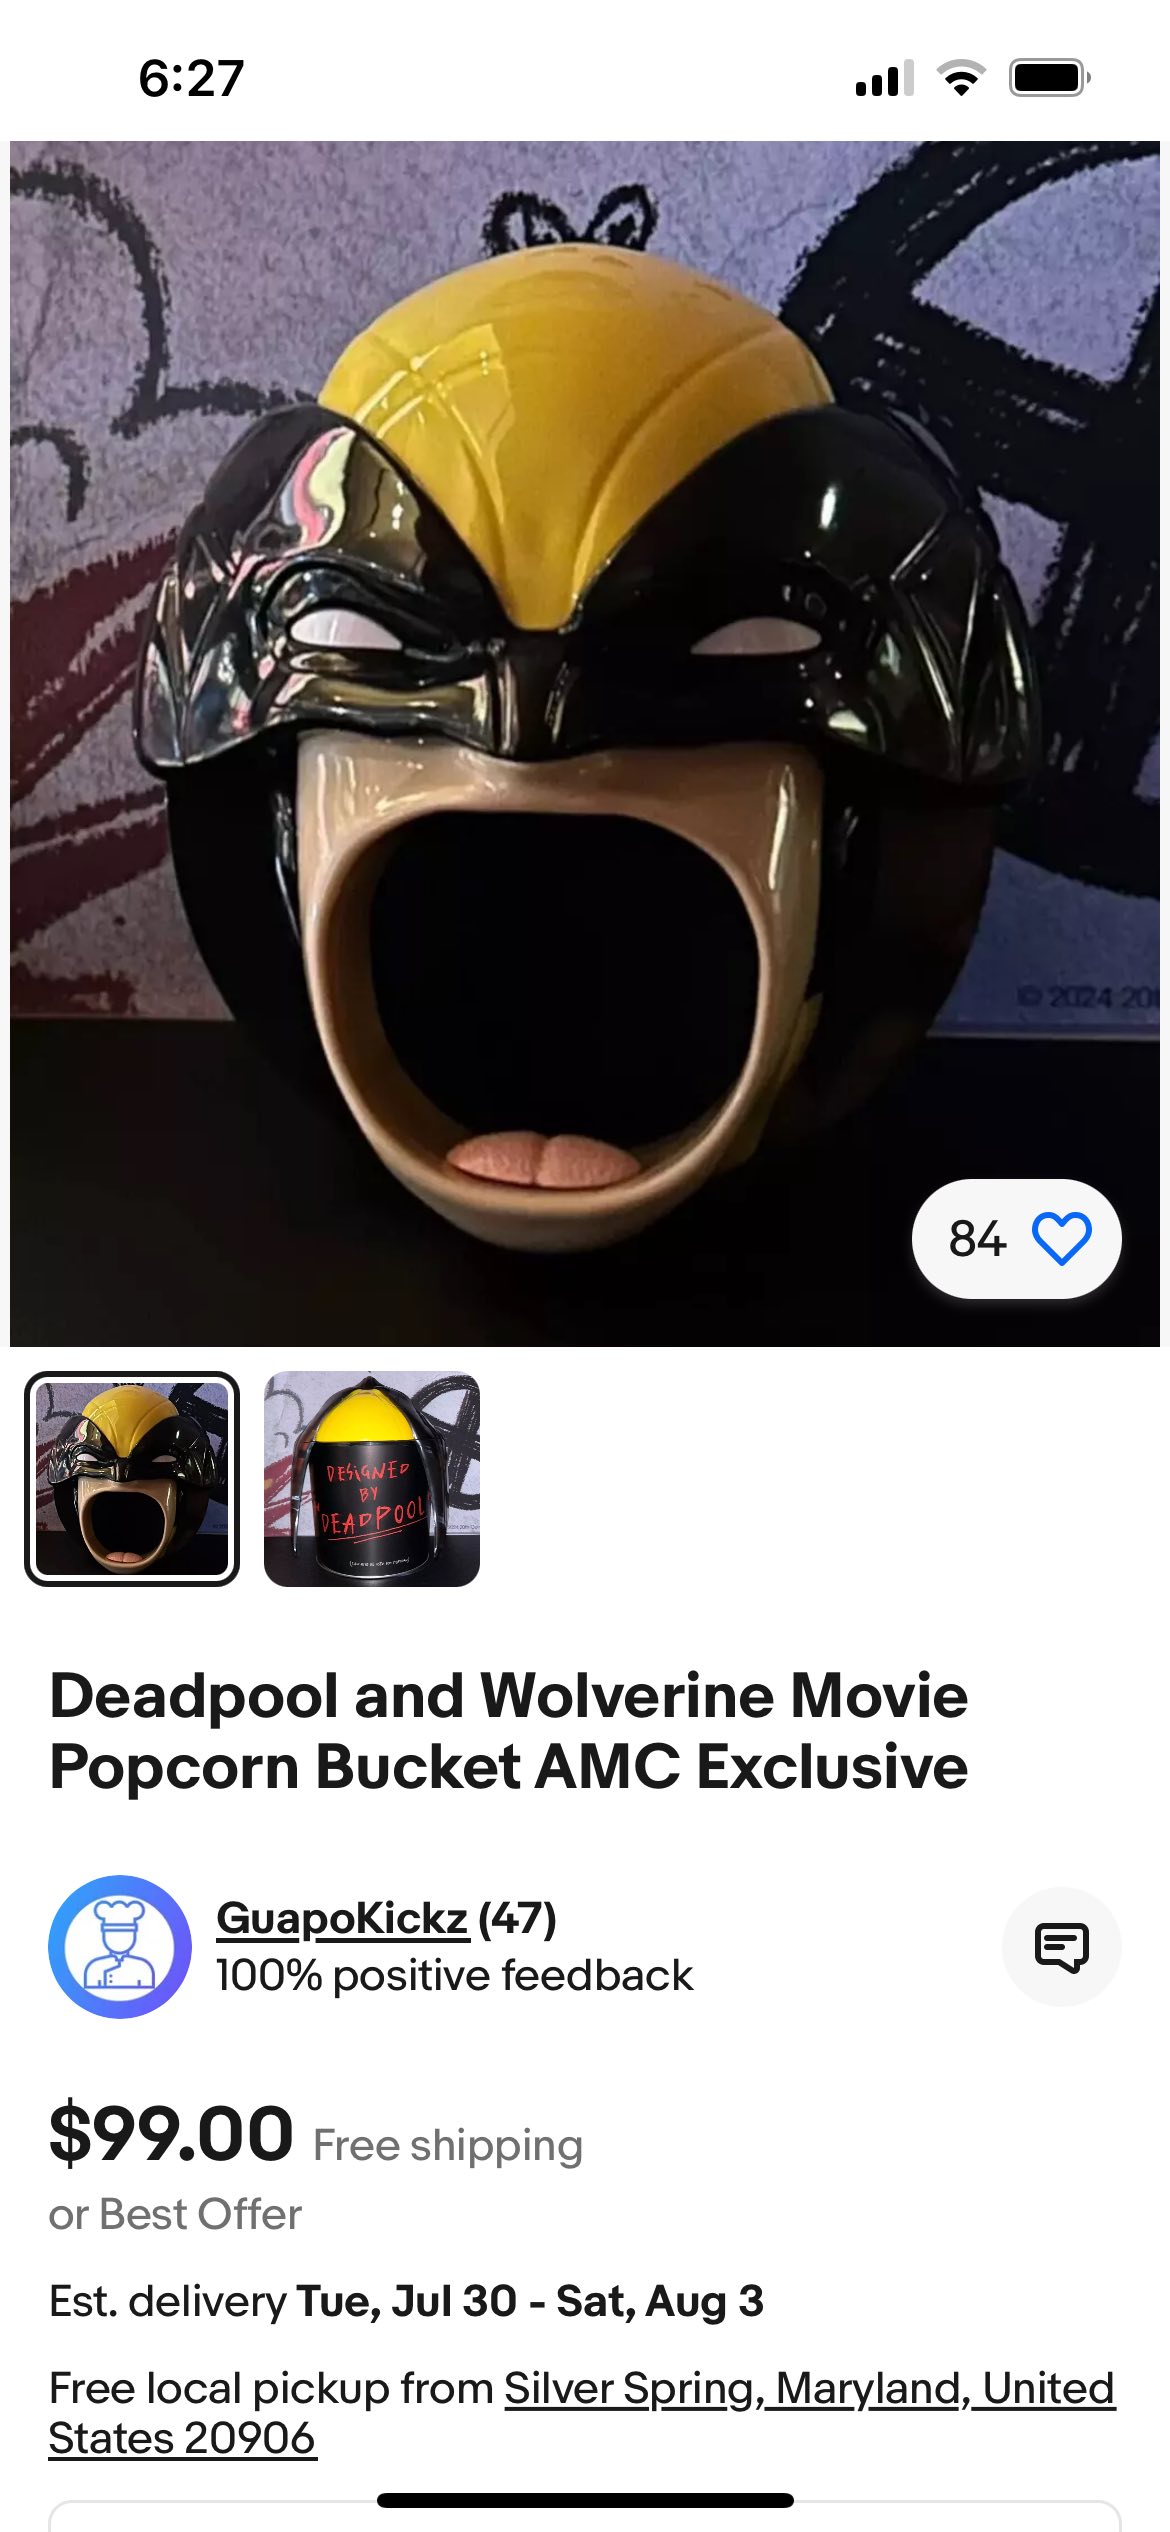 Wolverine AMC Exclusive Popcorn Buckets Already Sold Out!